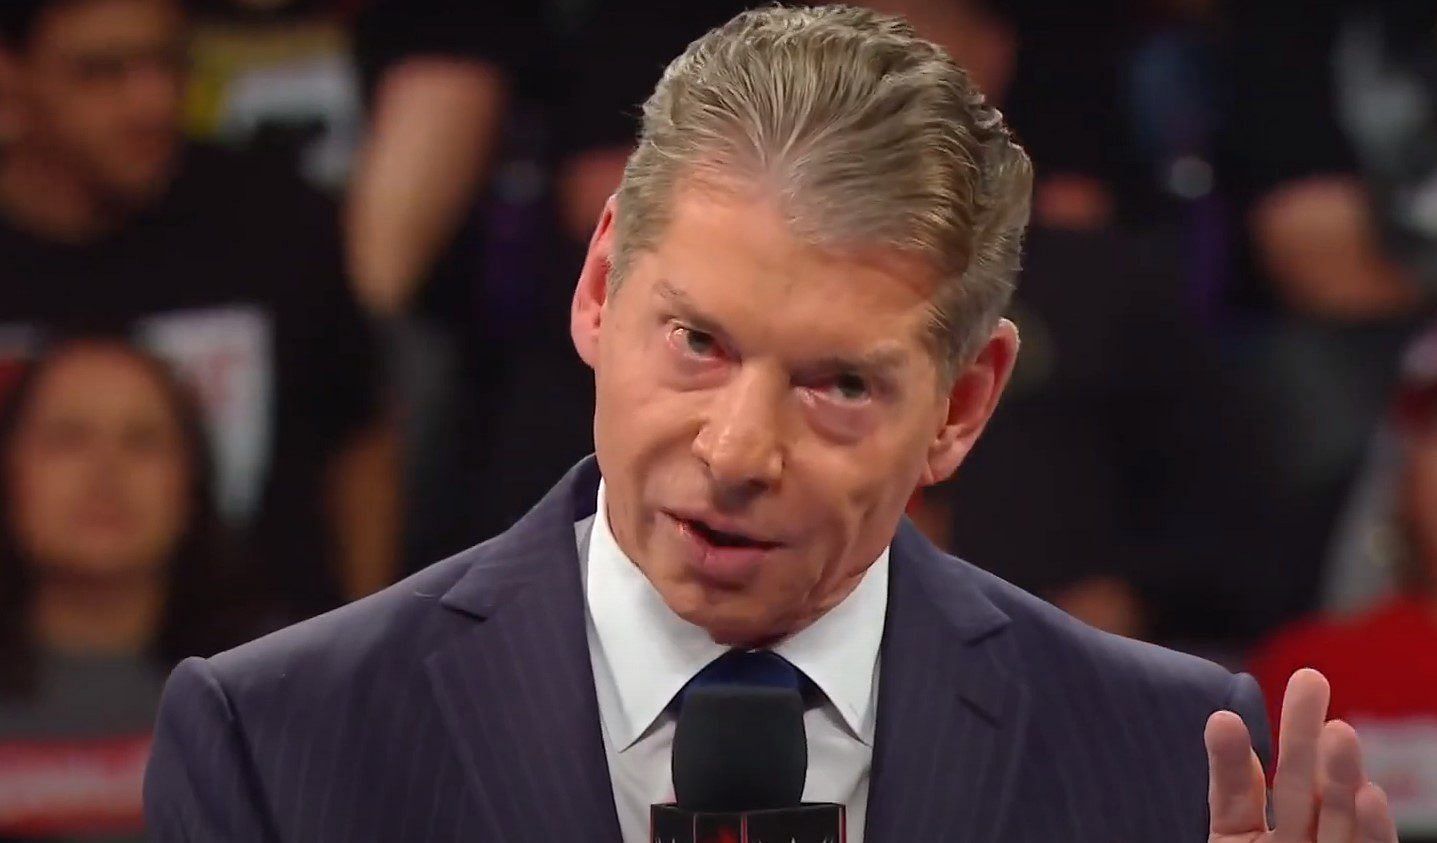 Vince McMahon may be the greatest heel in WWE history but won't go into the Hall of Fame